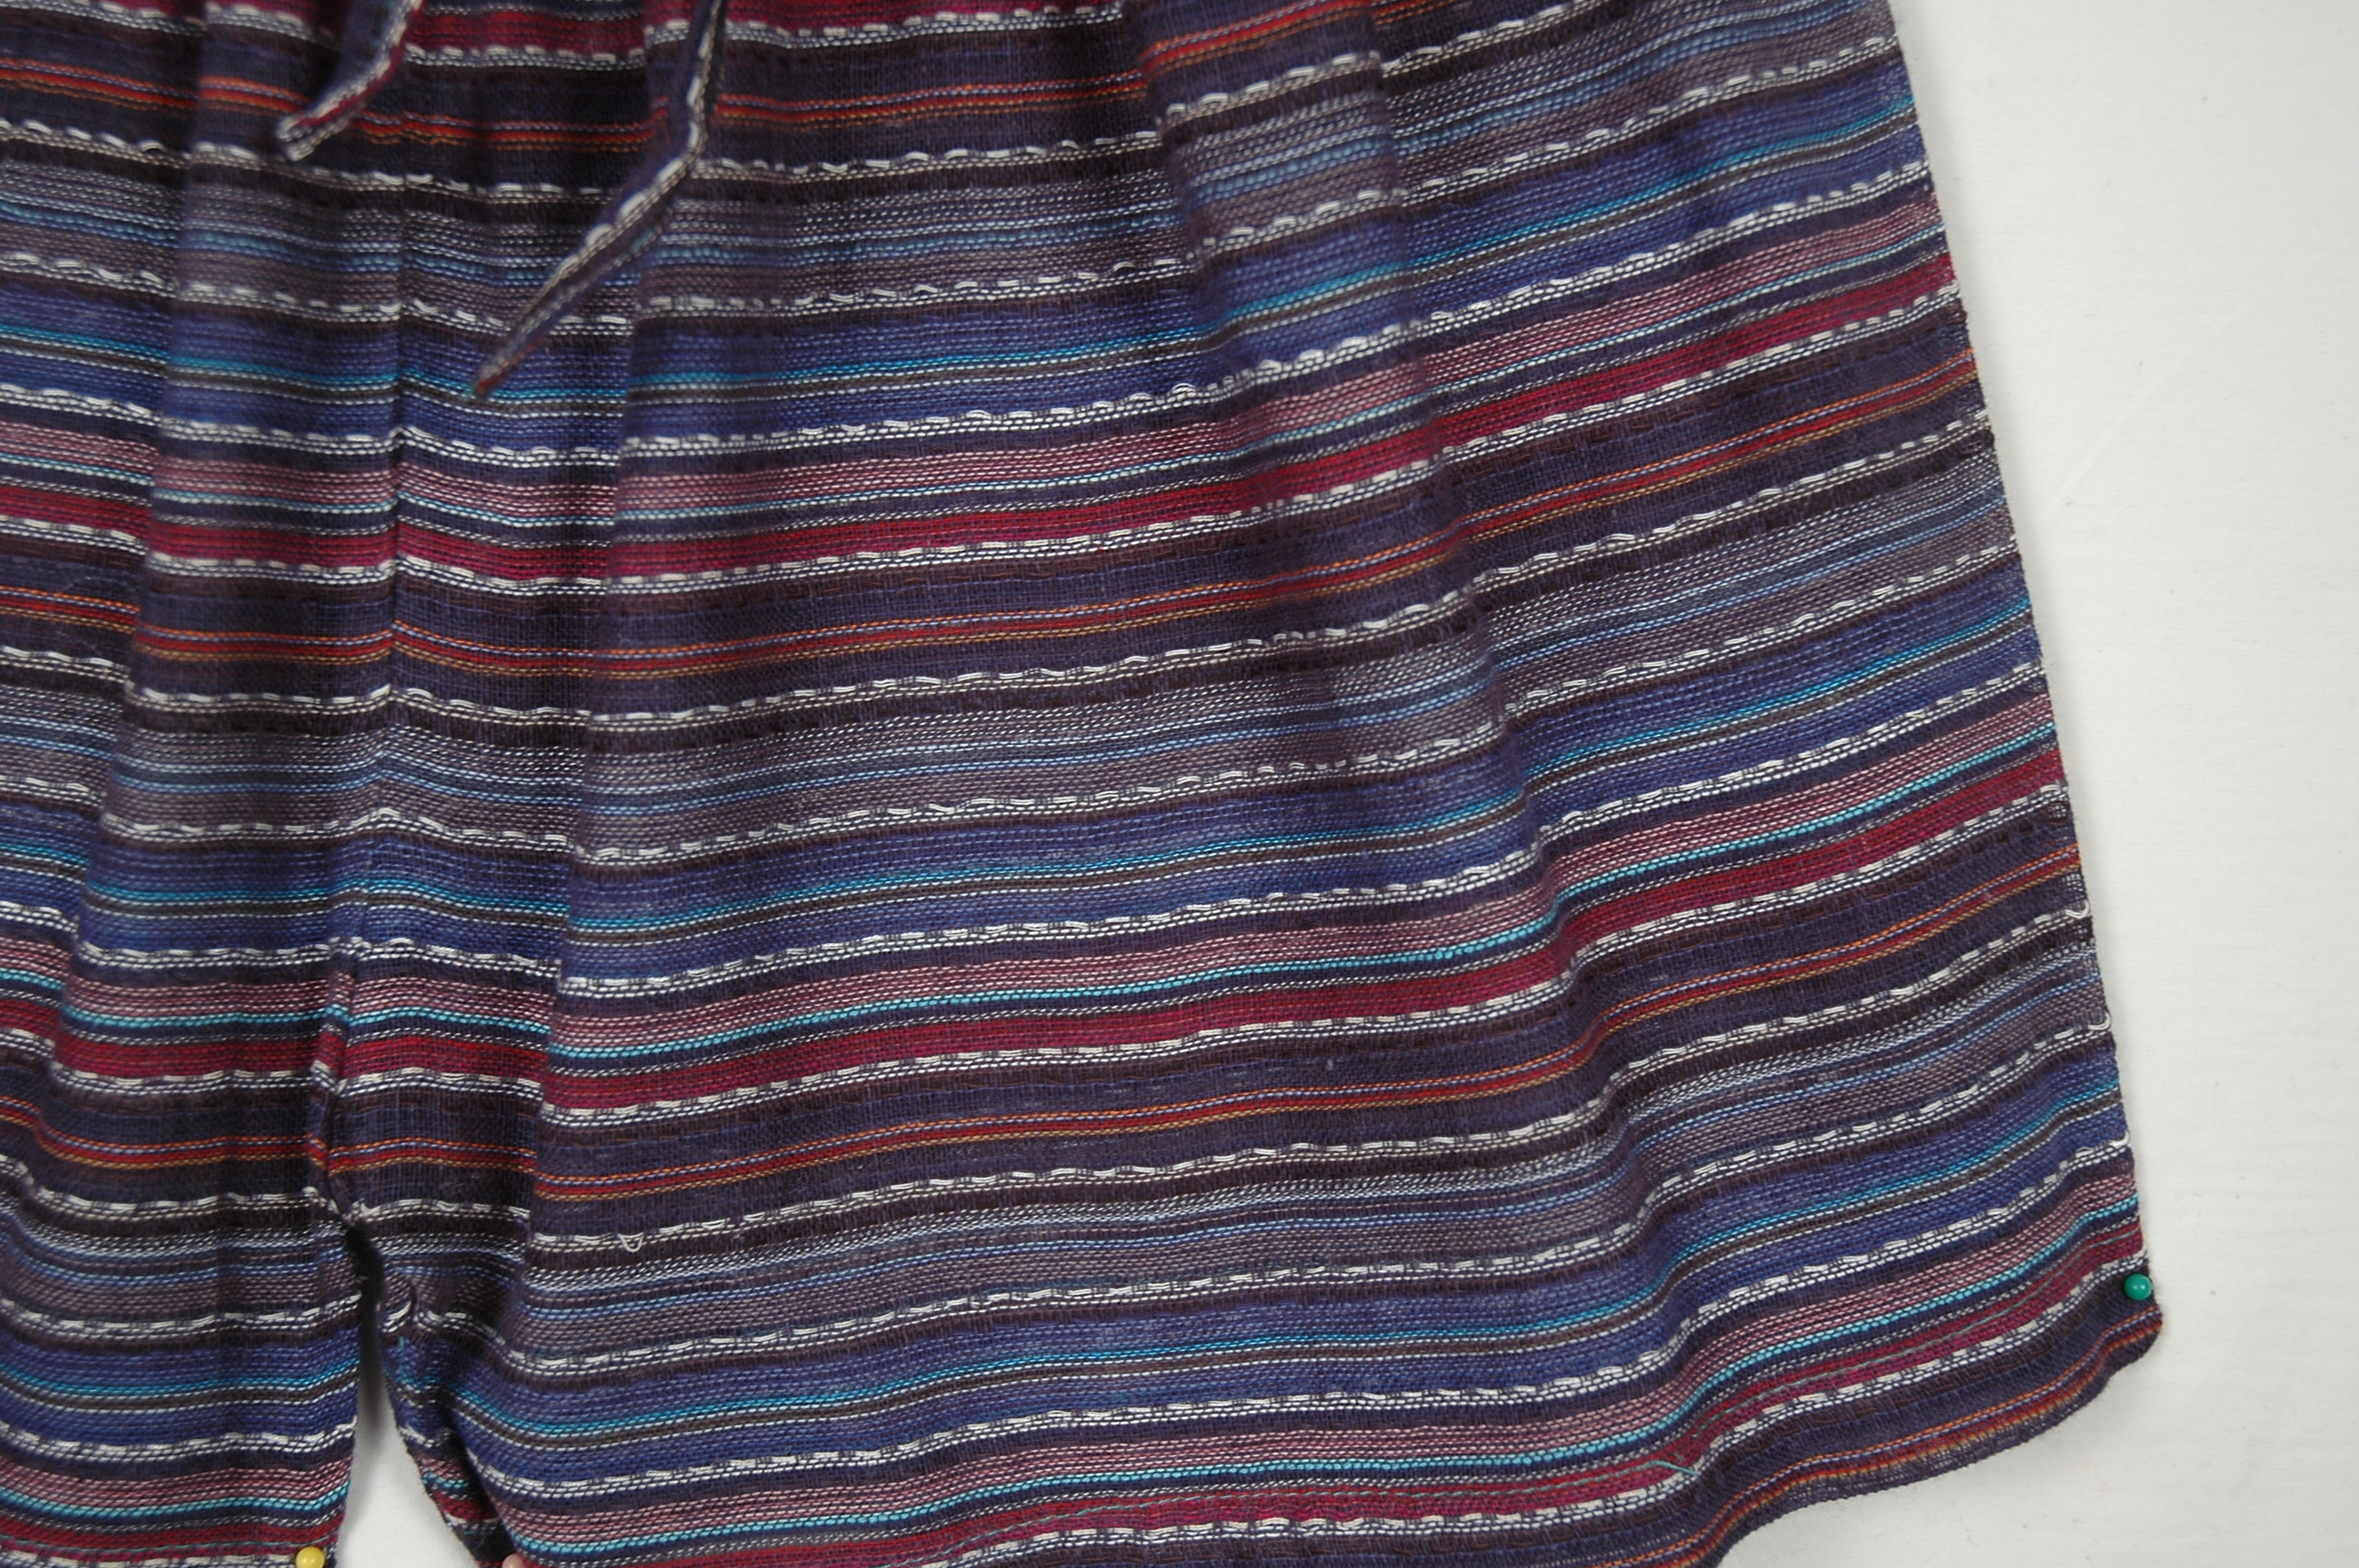 Cotton Summer Beach Pool Lounge Shorts in Stripes